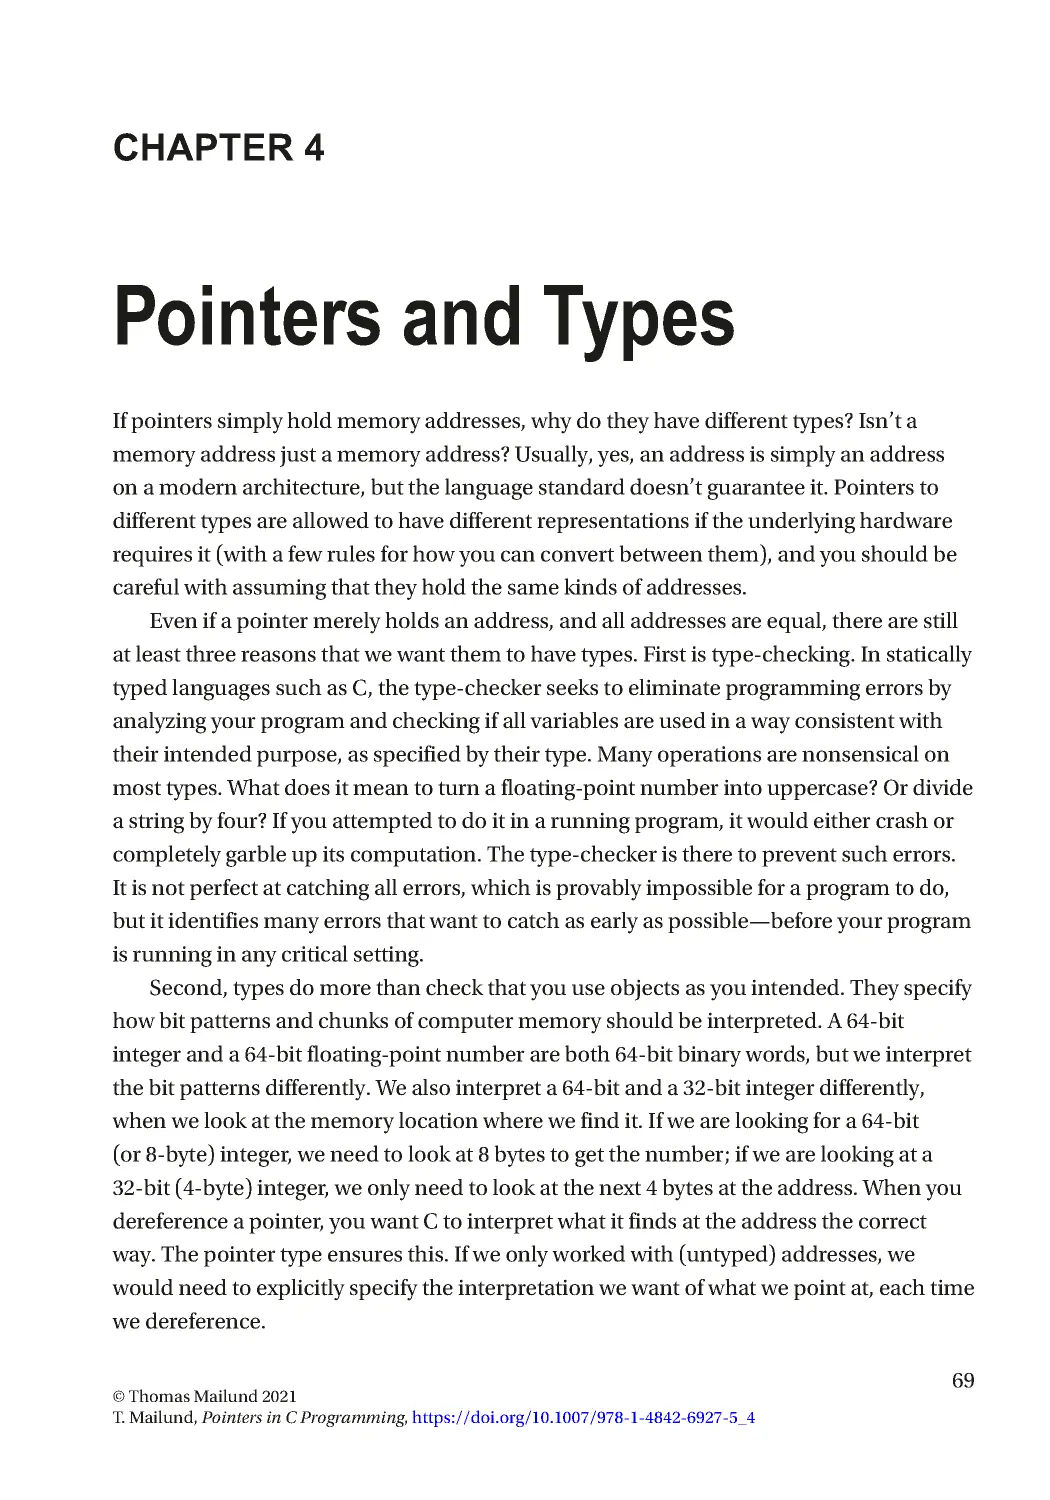 Chapter 4: Pointers and Types